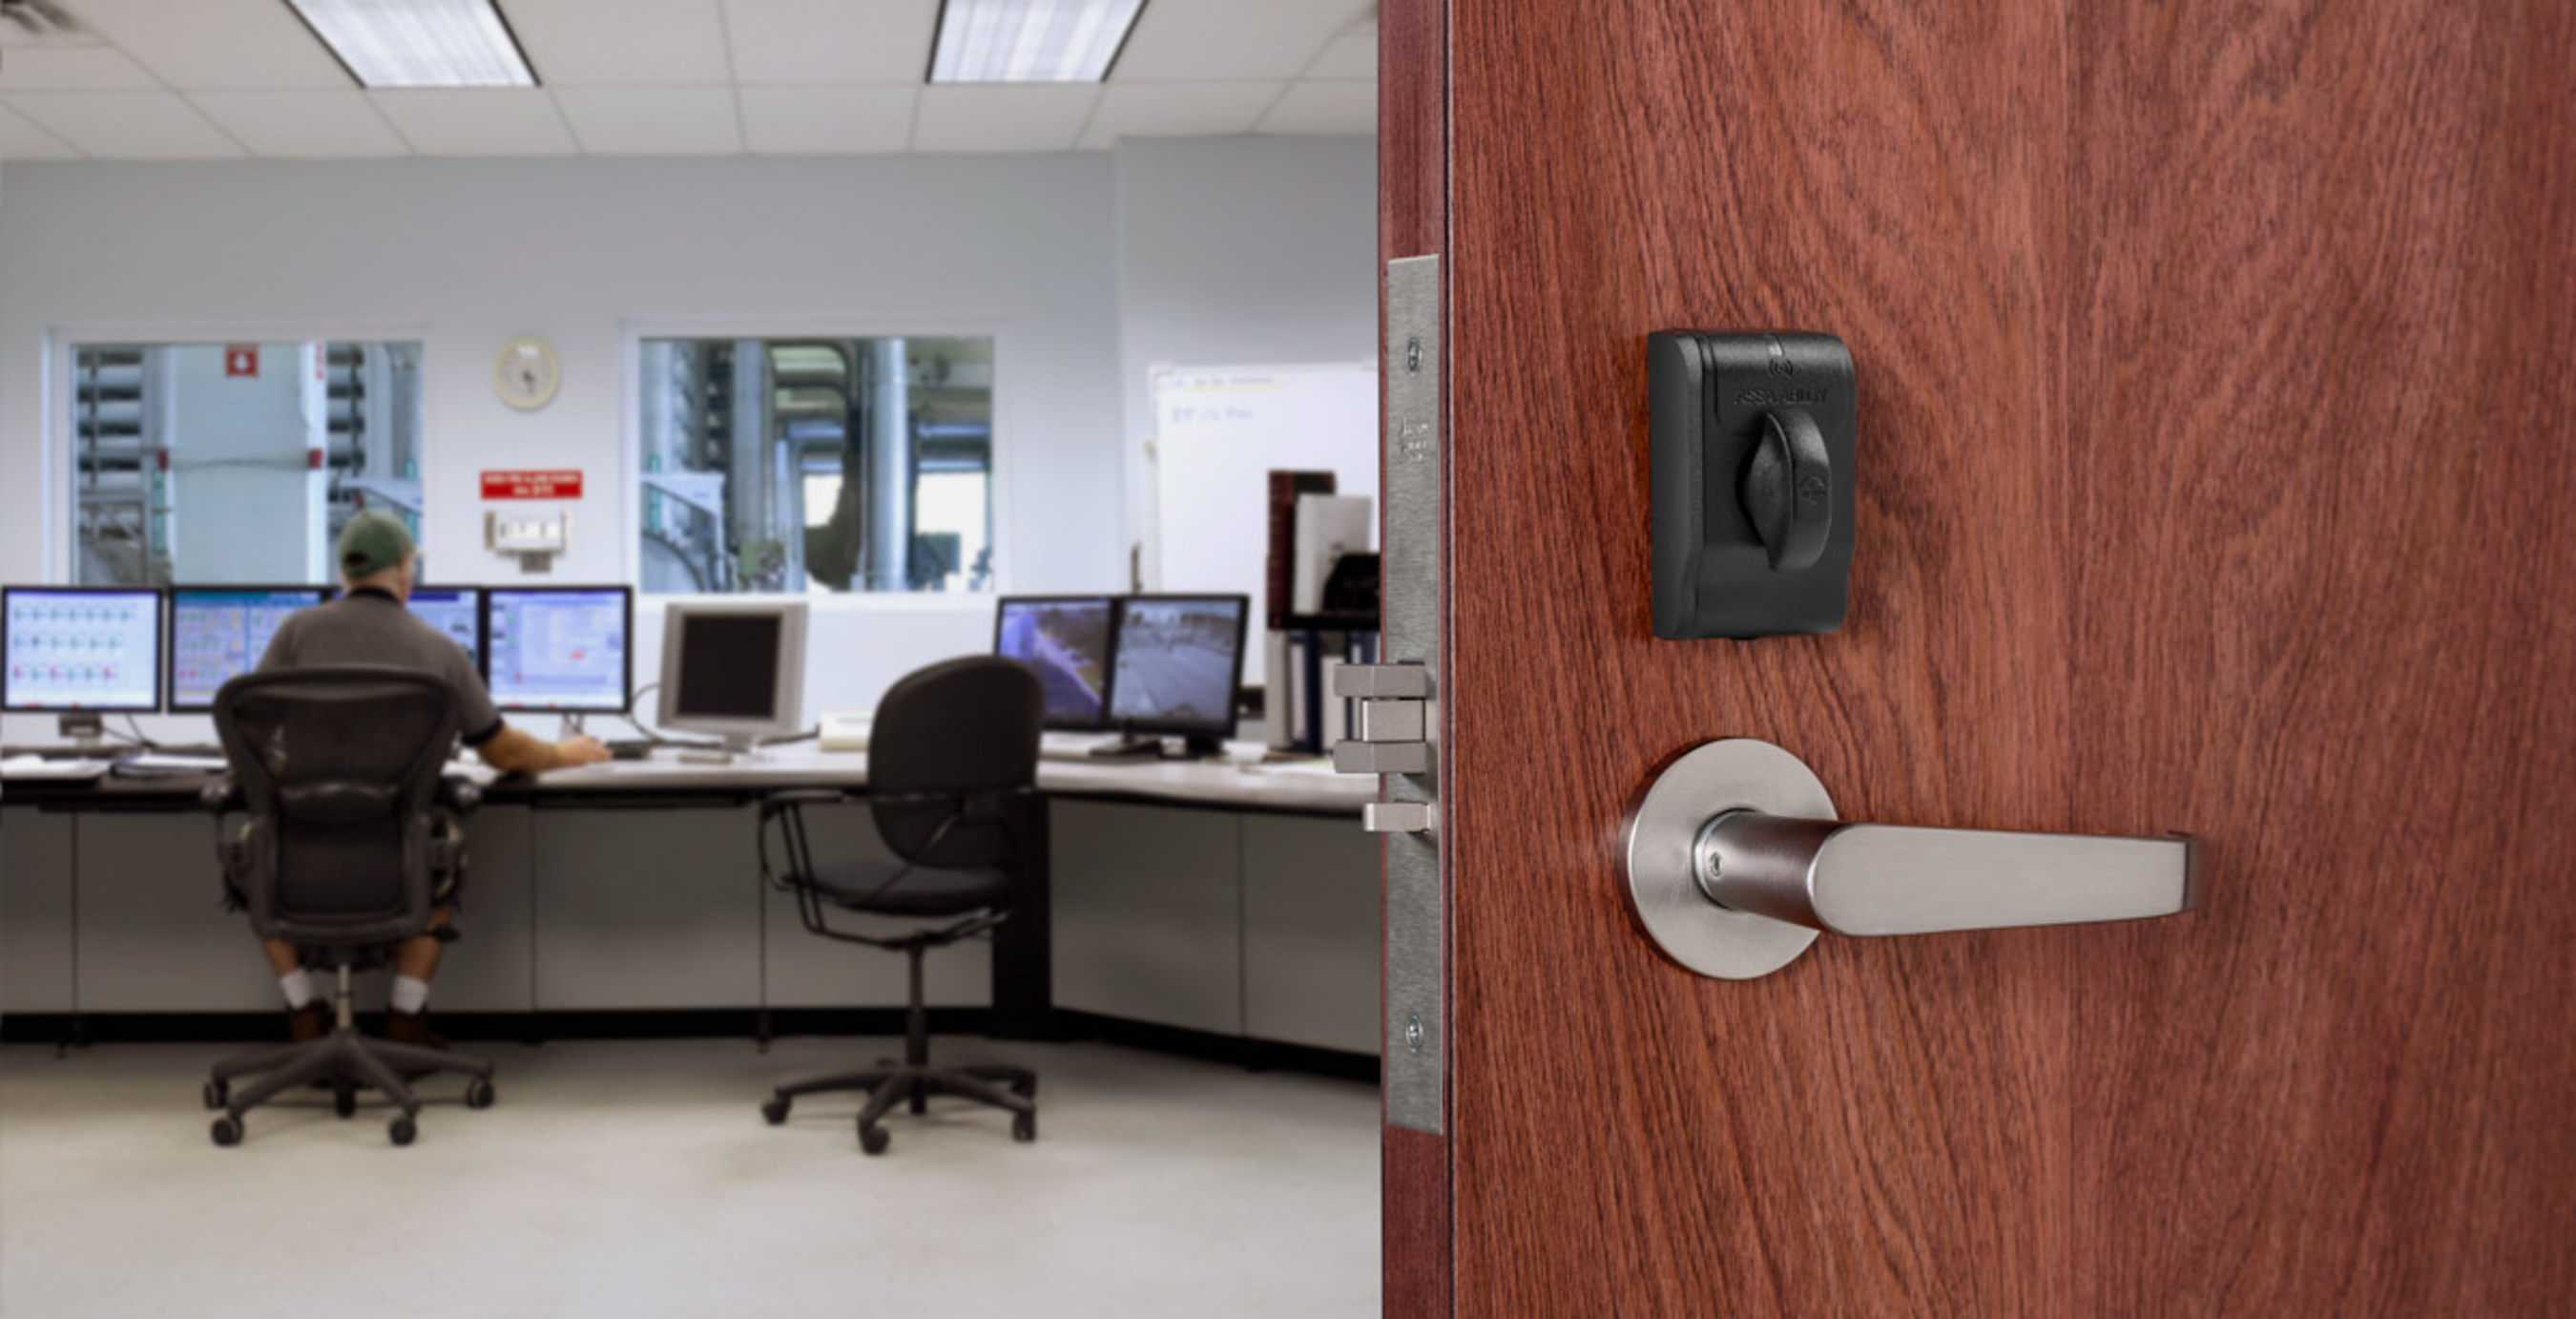 Medeco's M100 eCylinder uses local wireless communication between the lock and an Aperio hub to connect to an access control system, eliminating the cost and inconvenience of bringing wiring to the door opening.